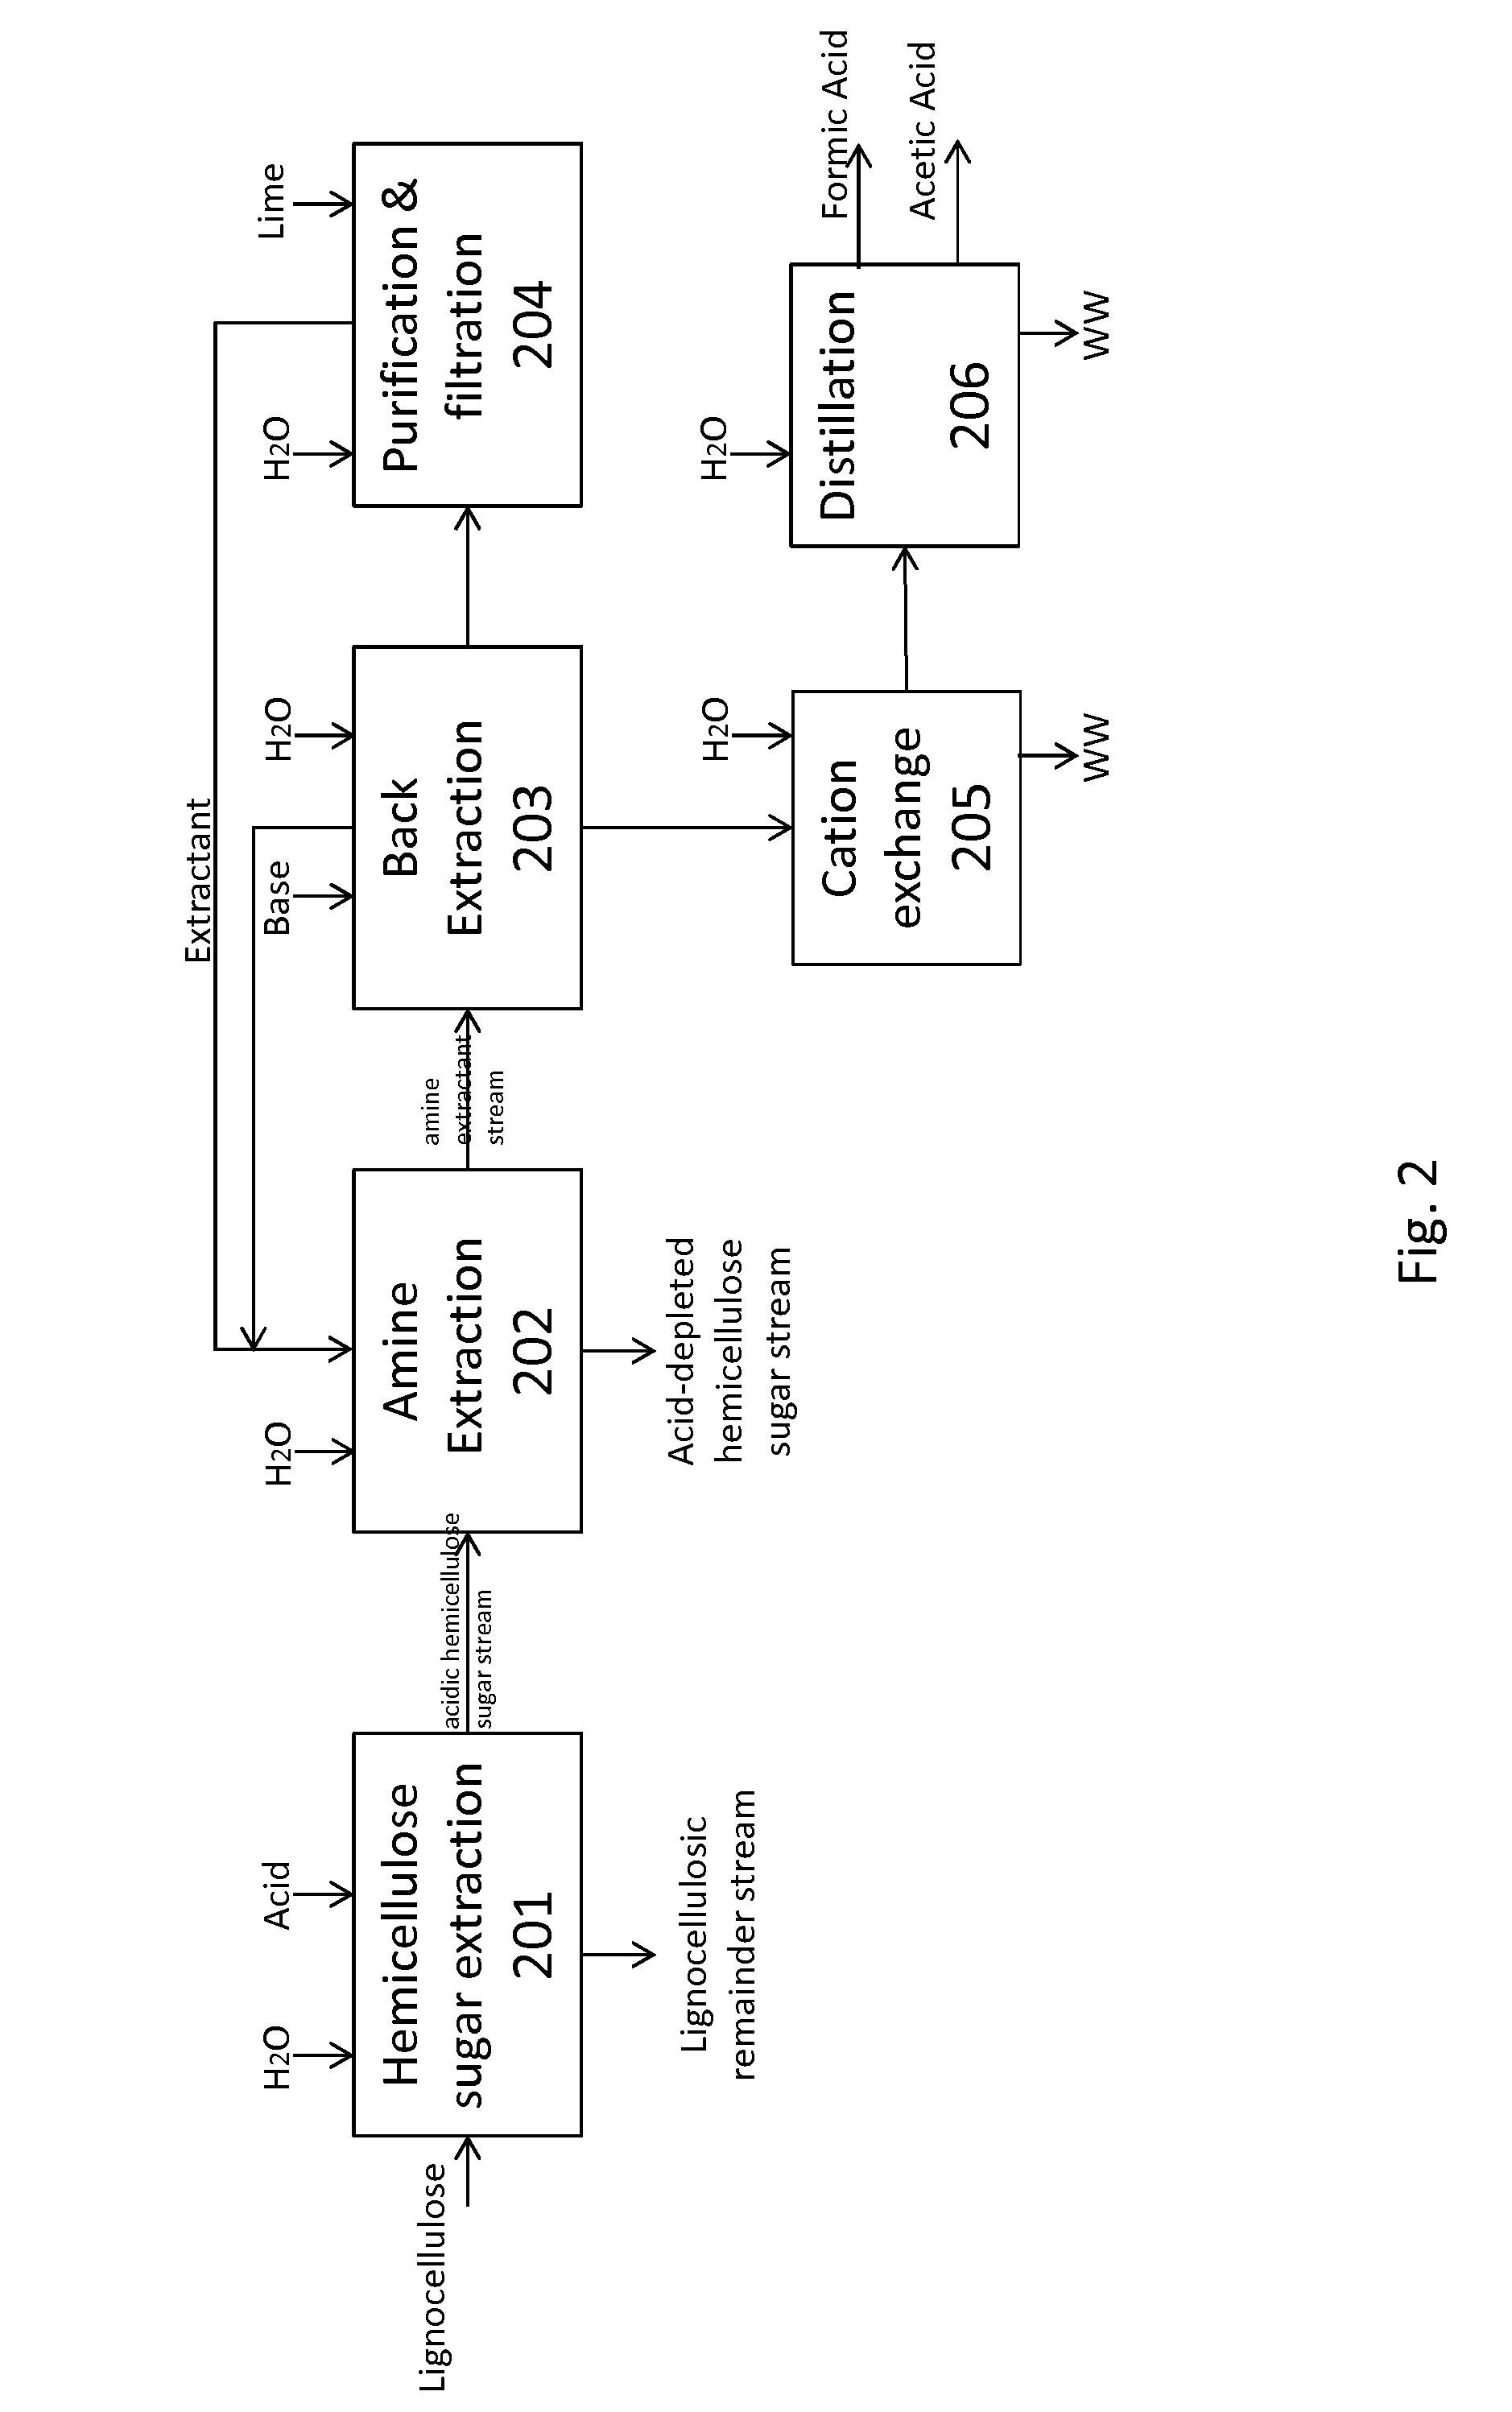 Methods for treating lignocellulosic materials